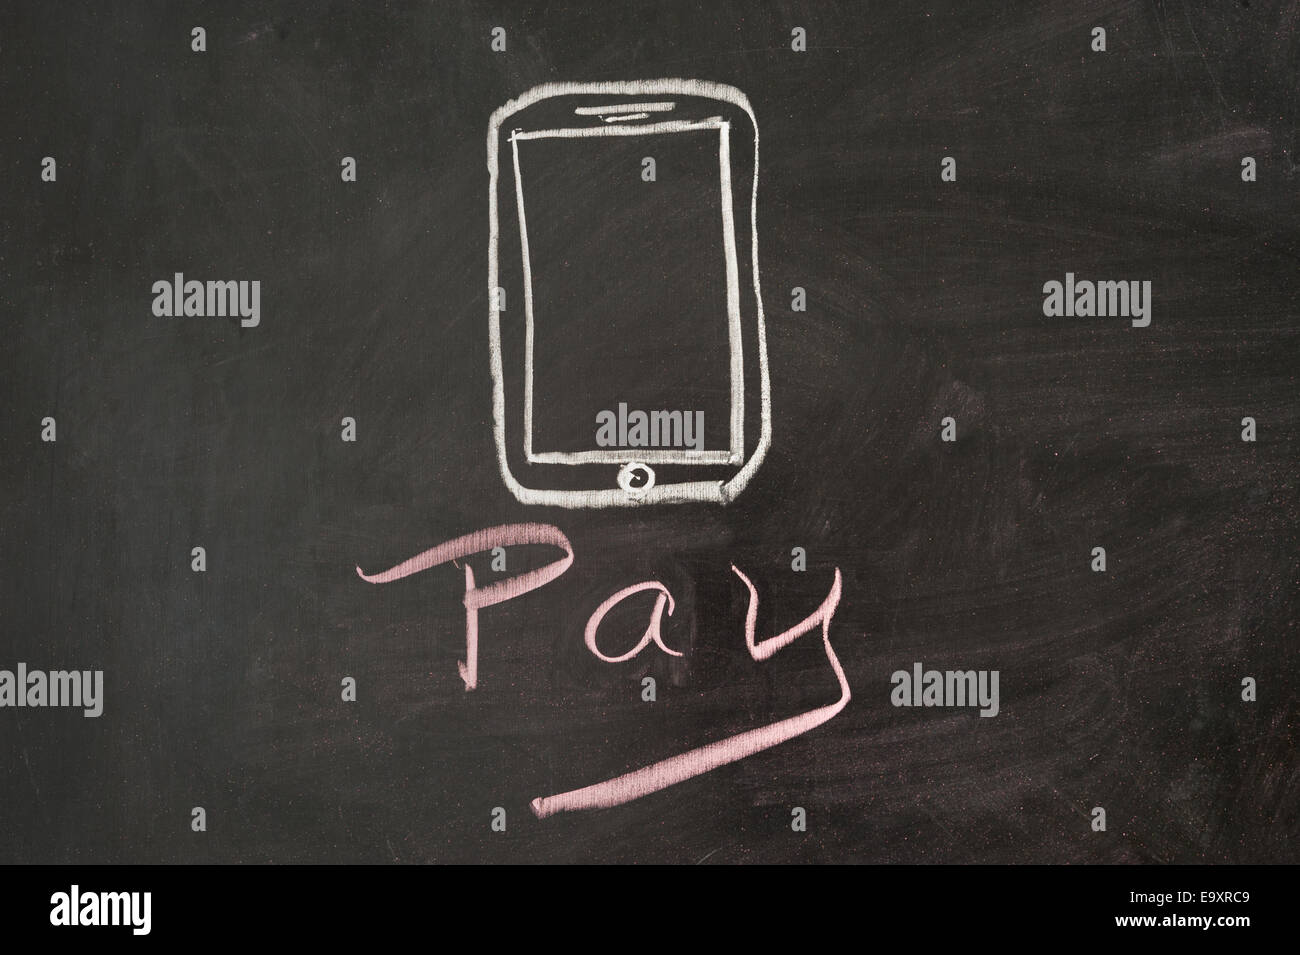 Pay by mobile concept drawn on blackboard Stock Photo